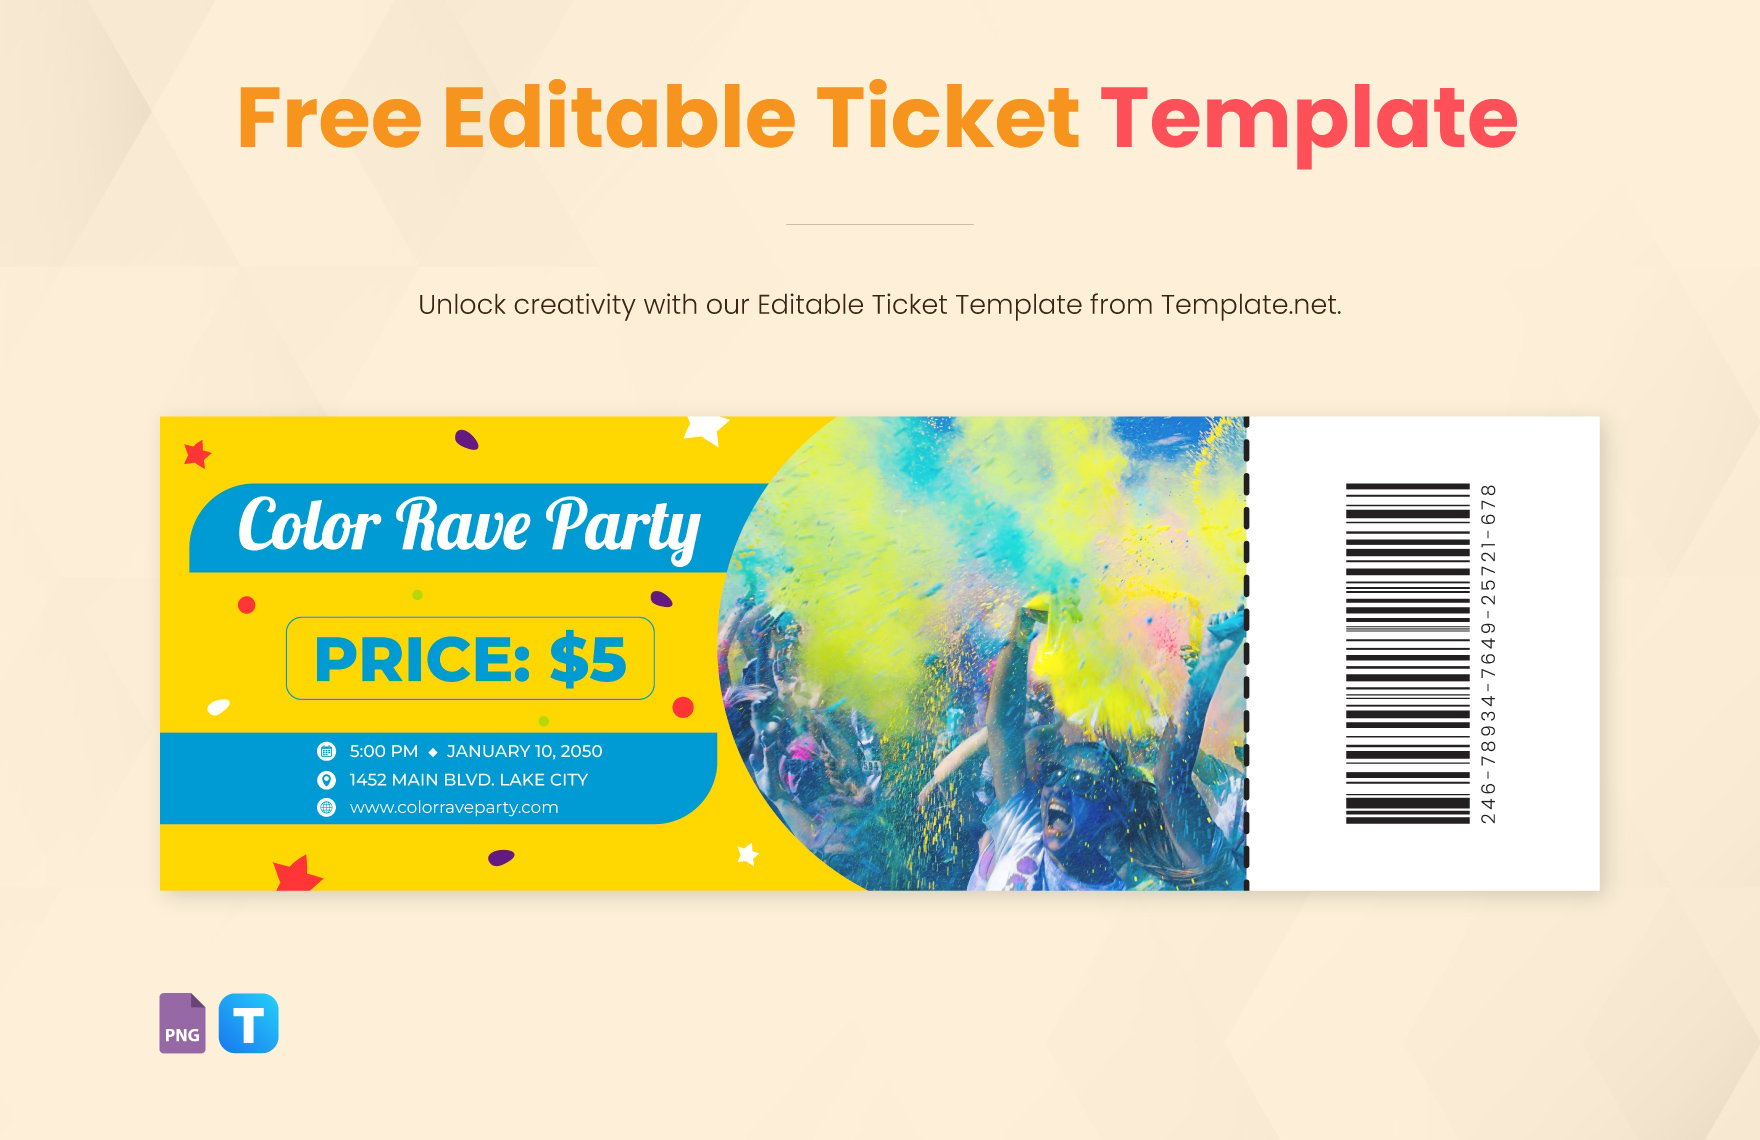 Editable Ticket Template in PNG